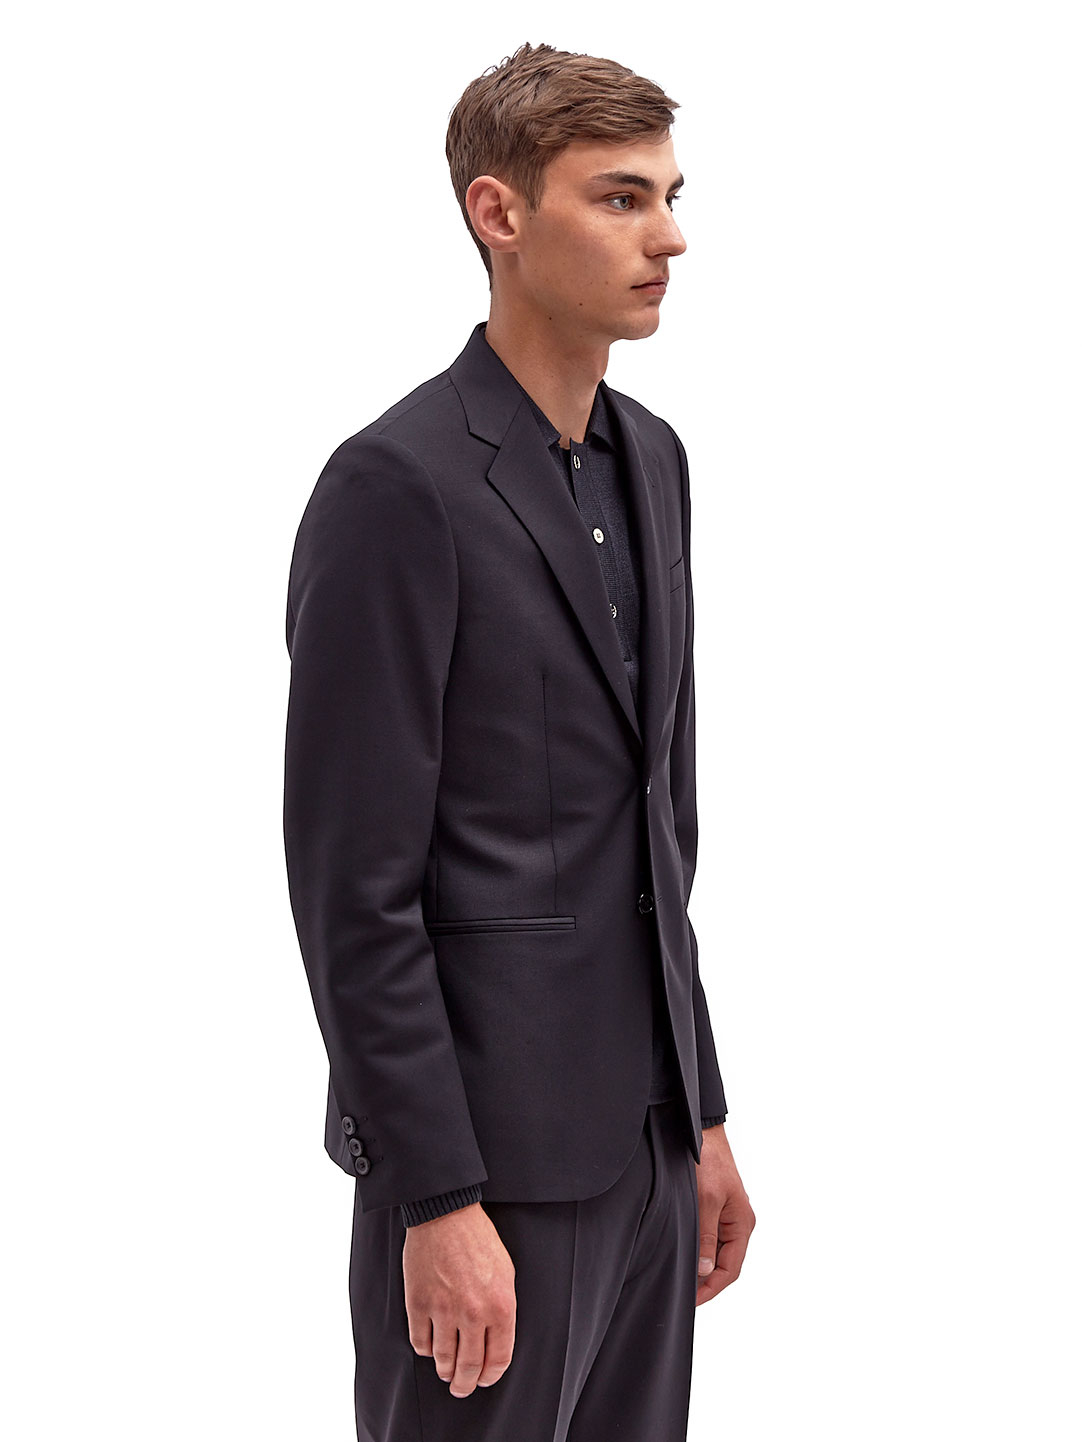 Lyst - Raf Simons Mens Classic 2 Button Jacket in Black for Men